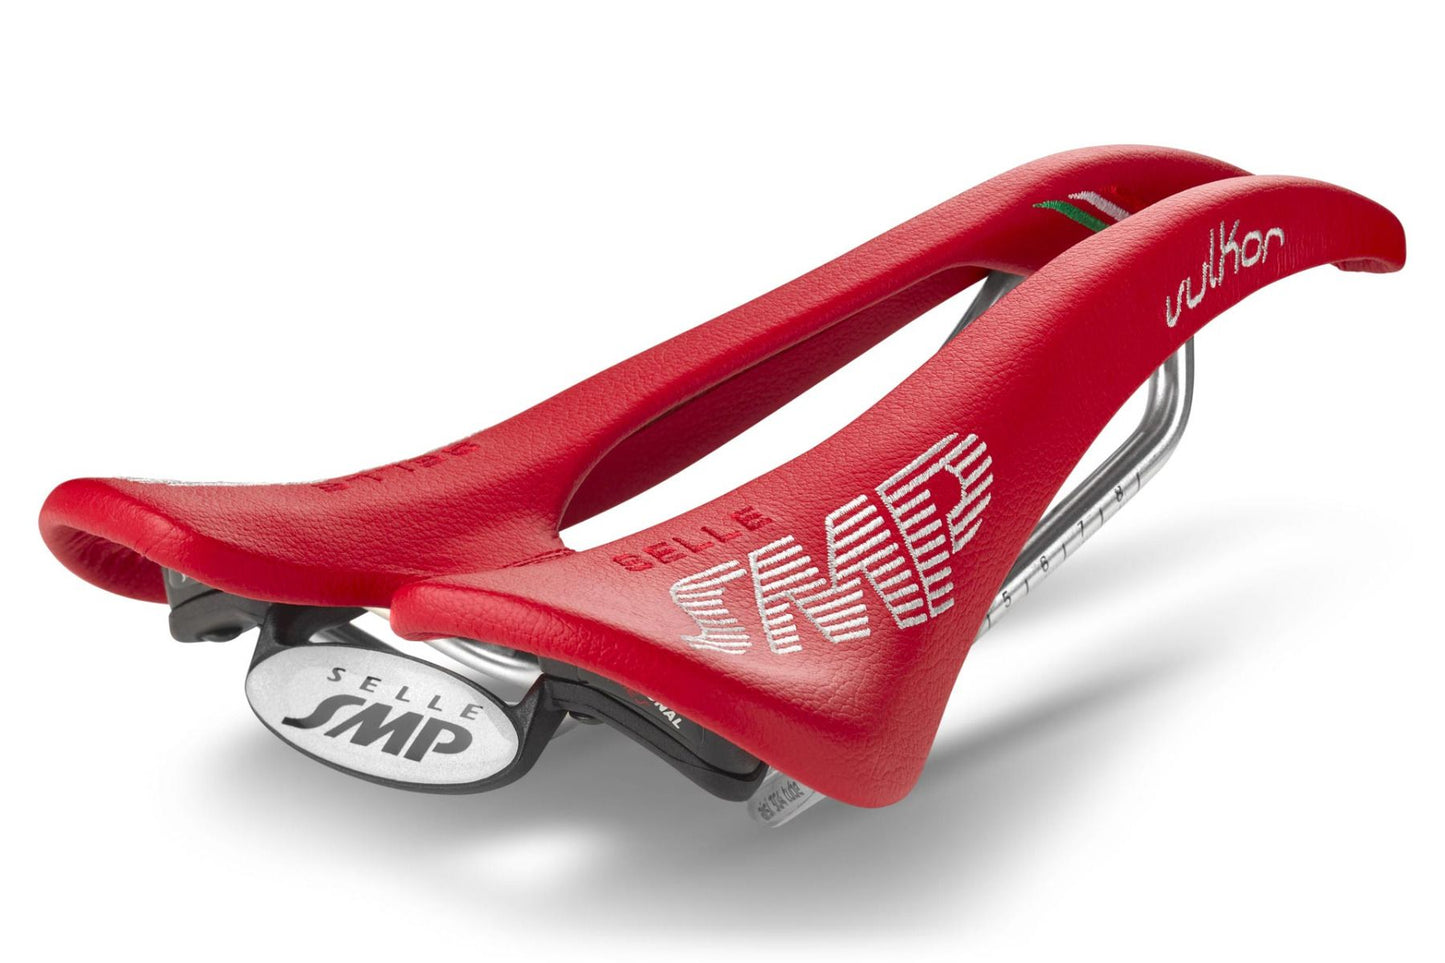 Selle SMP Vulkor Saddle with Carbon Rails (Red)